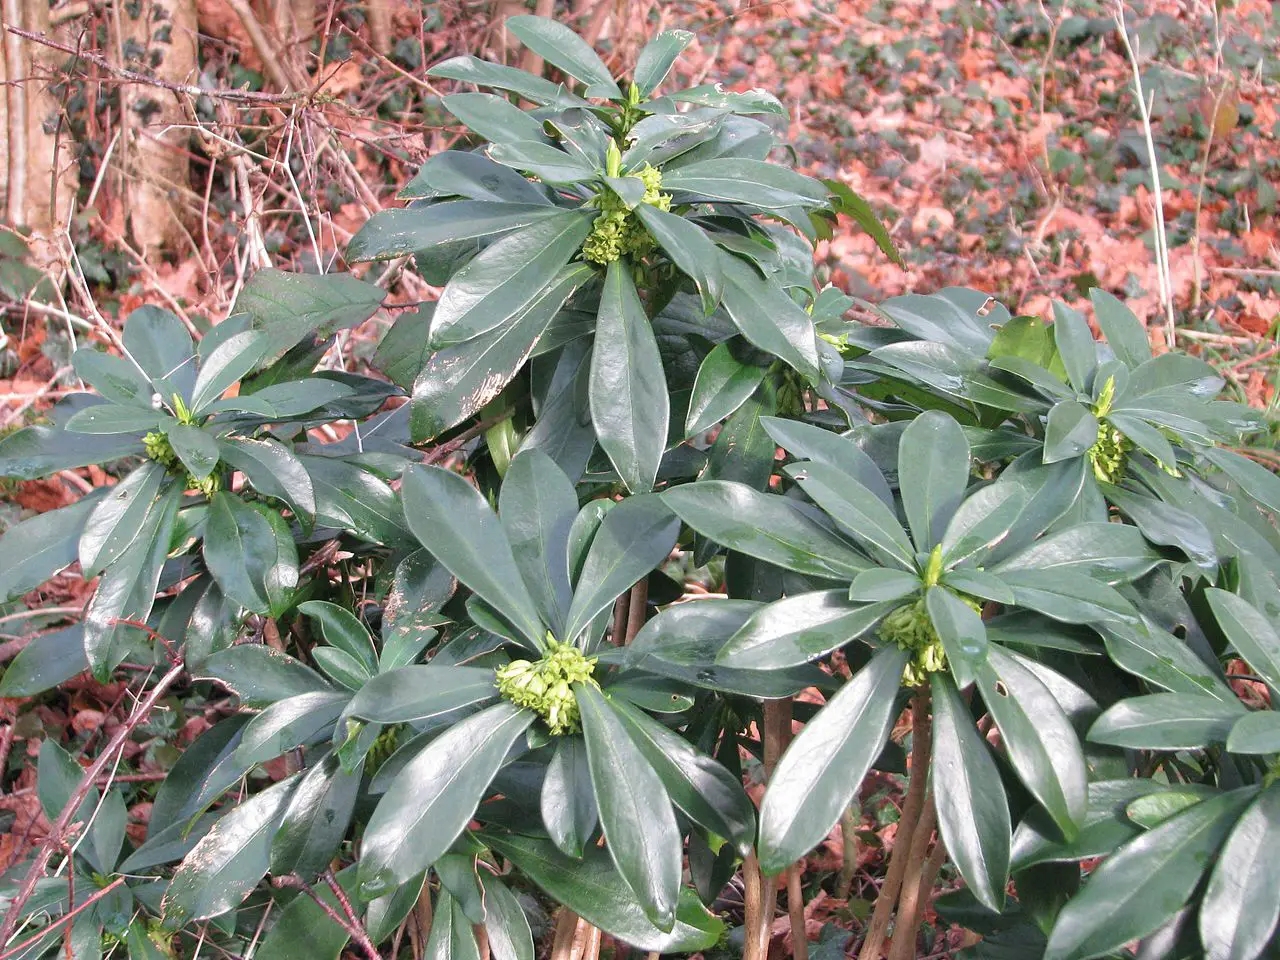 Daphne laureola: caring for this little shrub